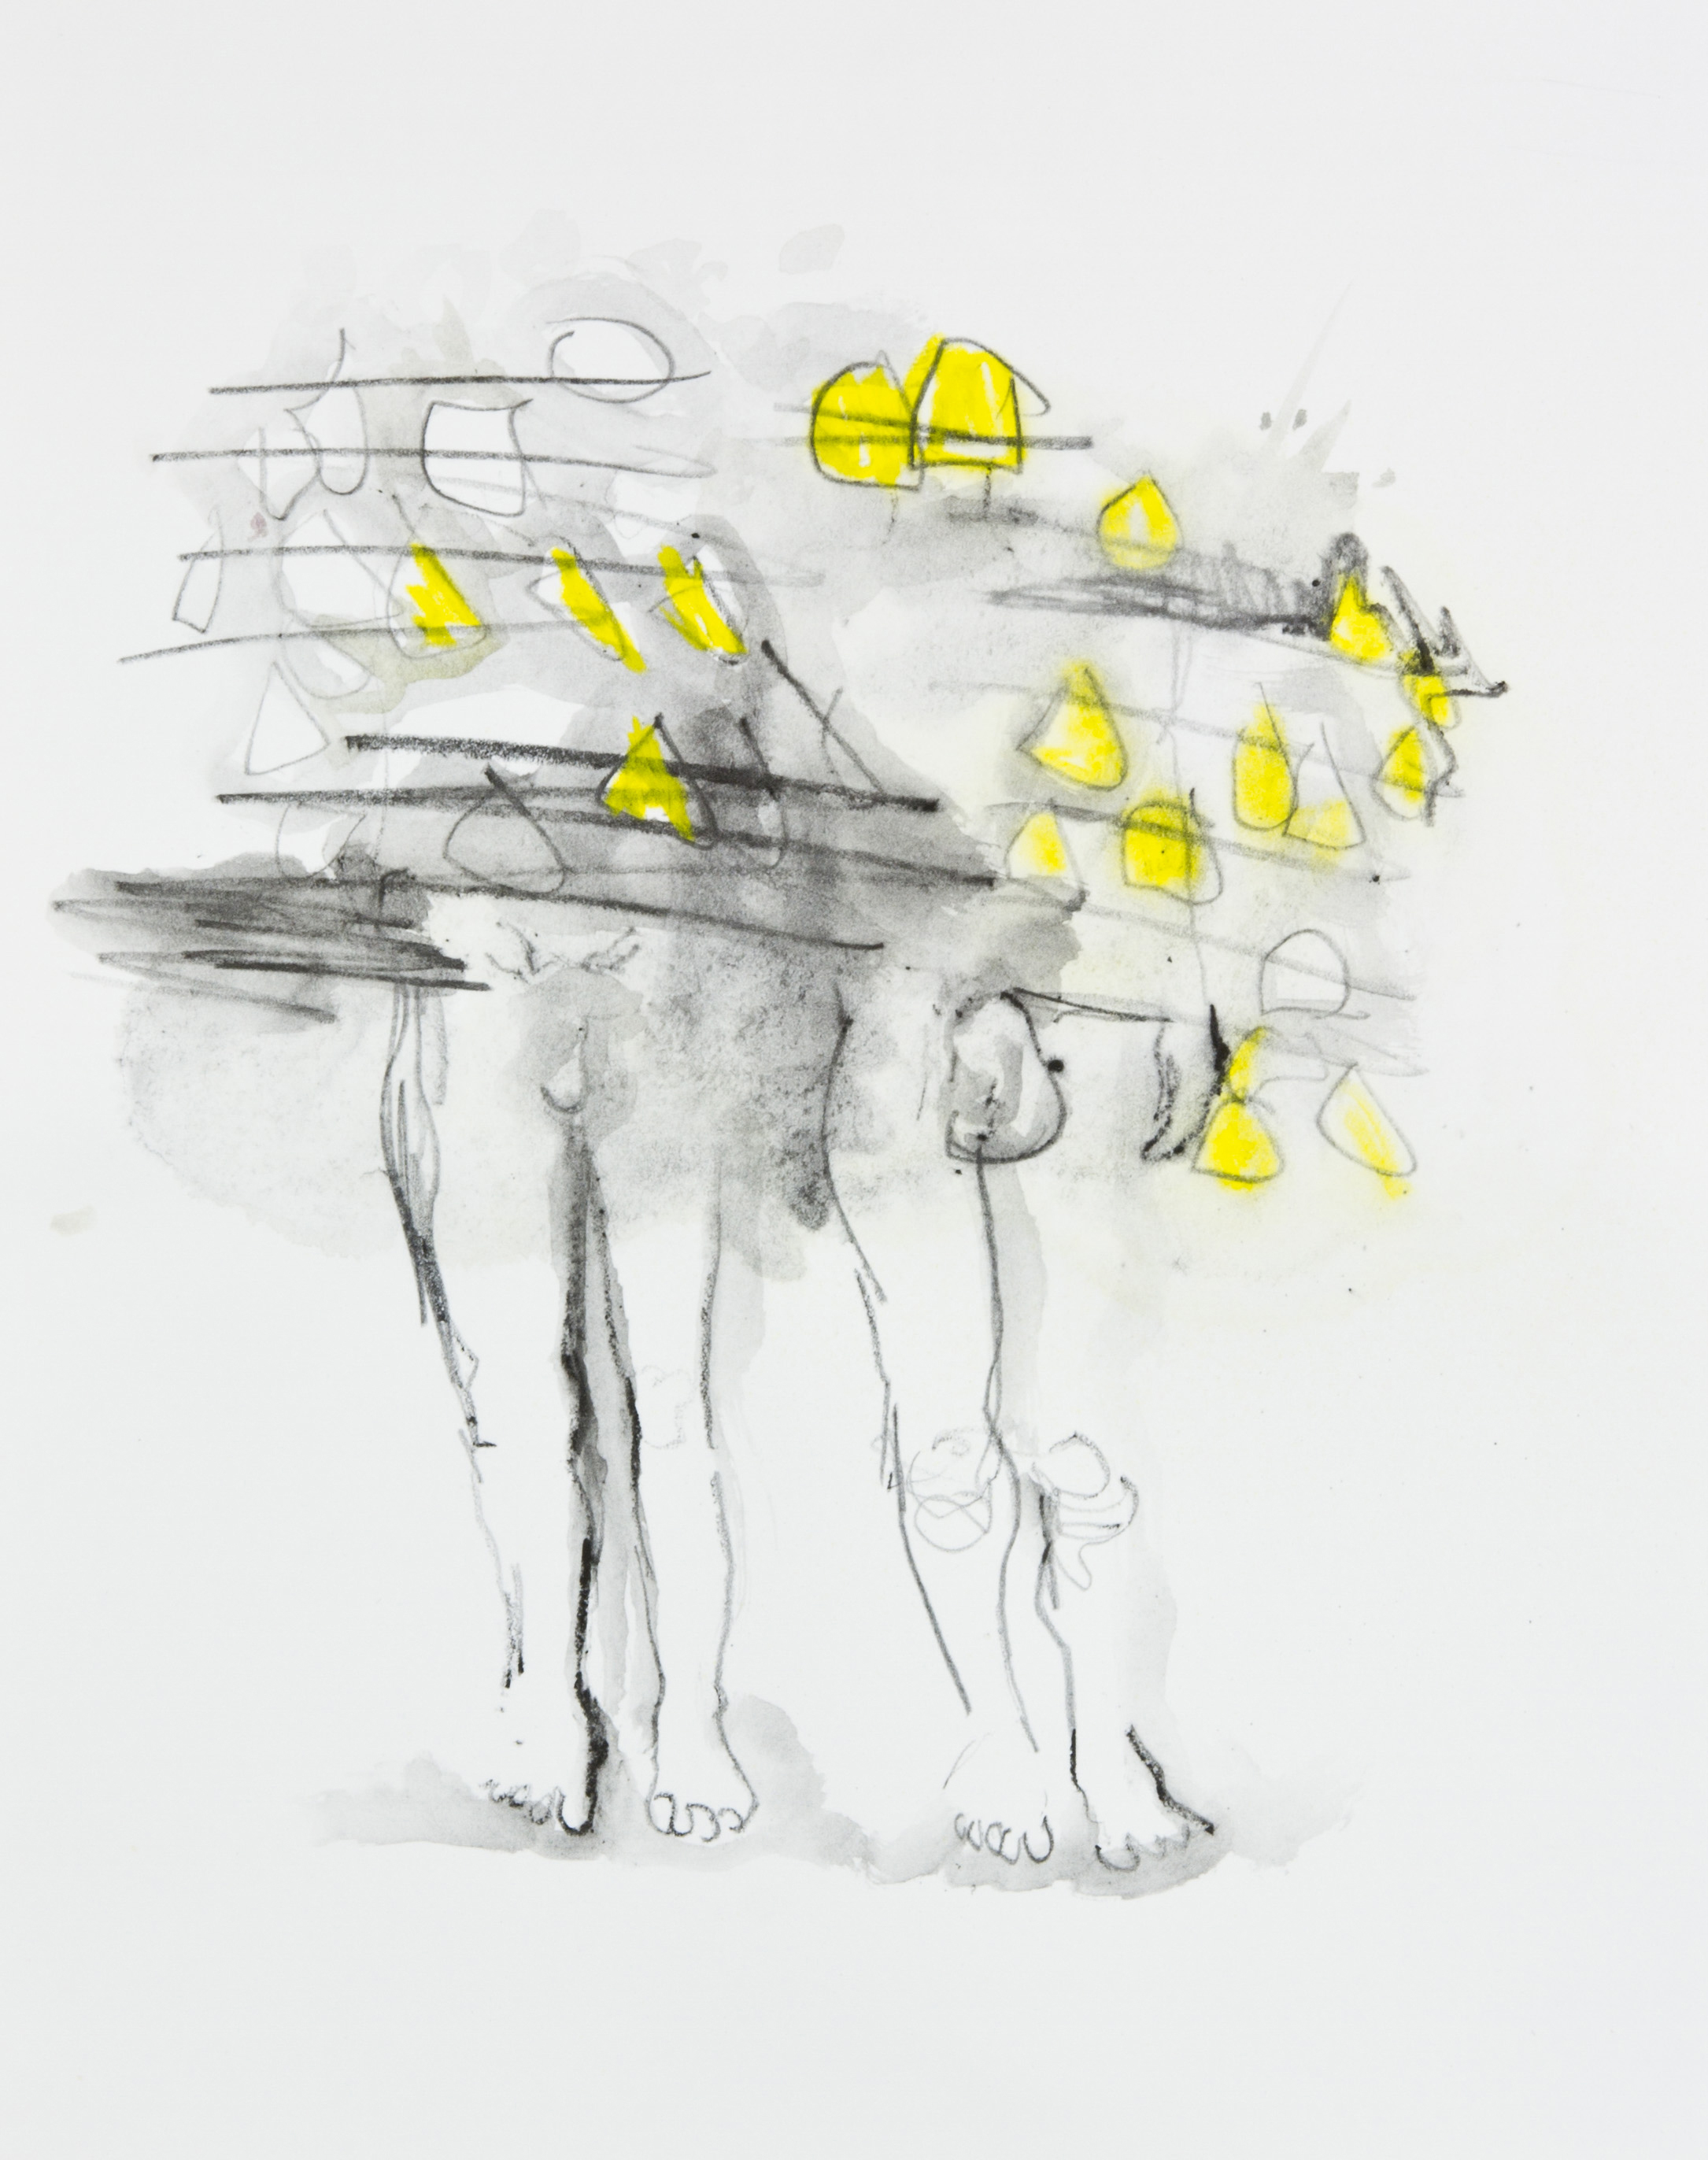 Yellow Creeping Around And In, 2013, graphite, crayon and watercolor pencil on paper, 11x14 inches